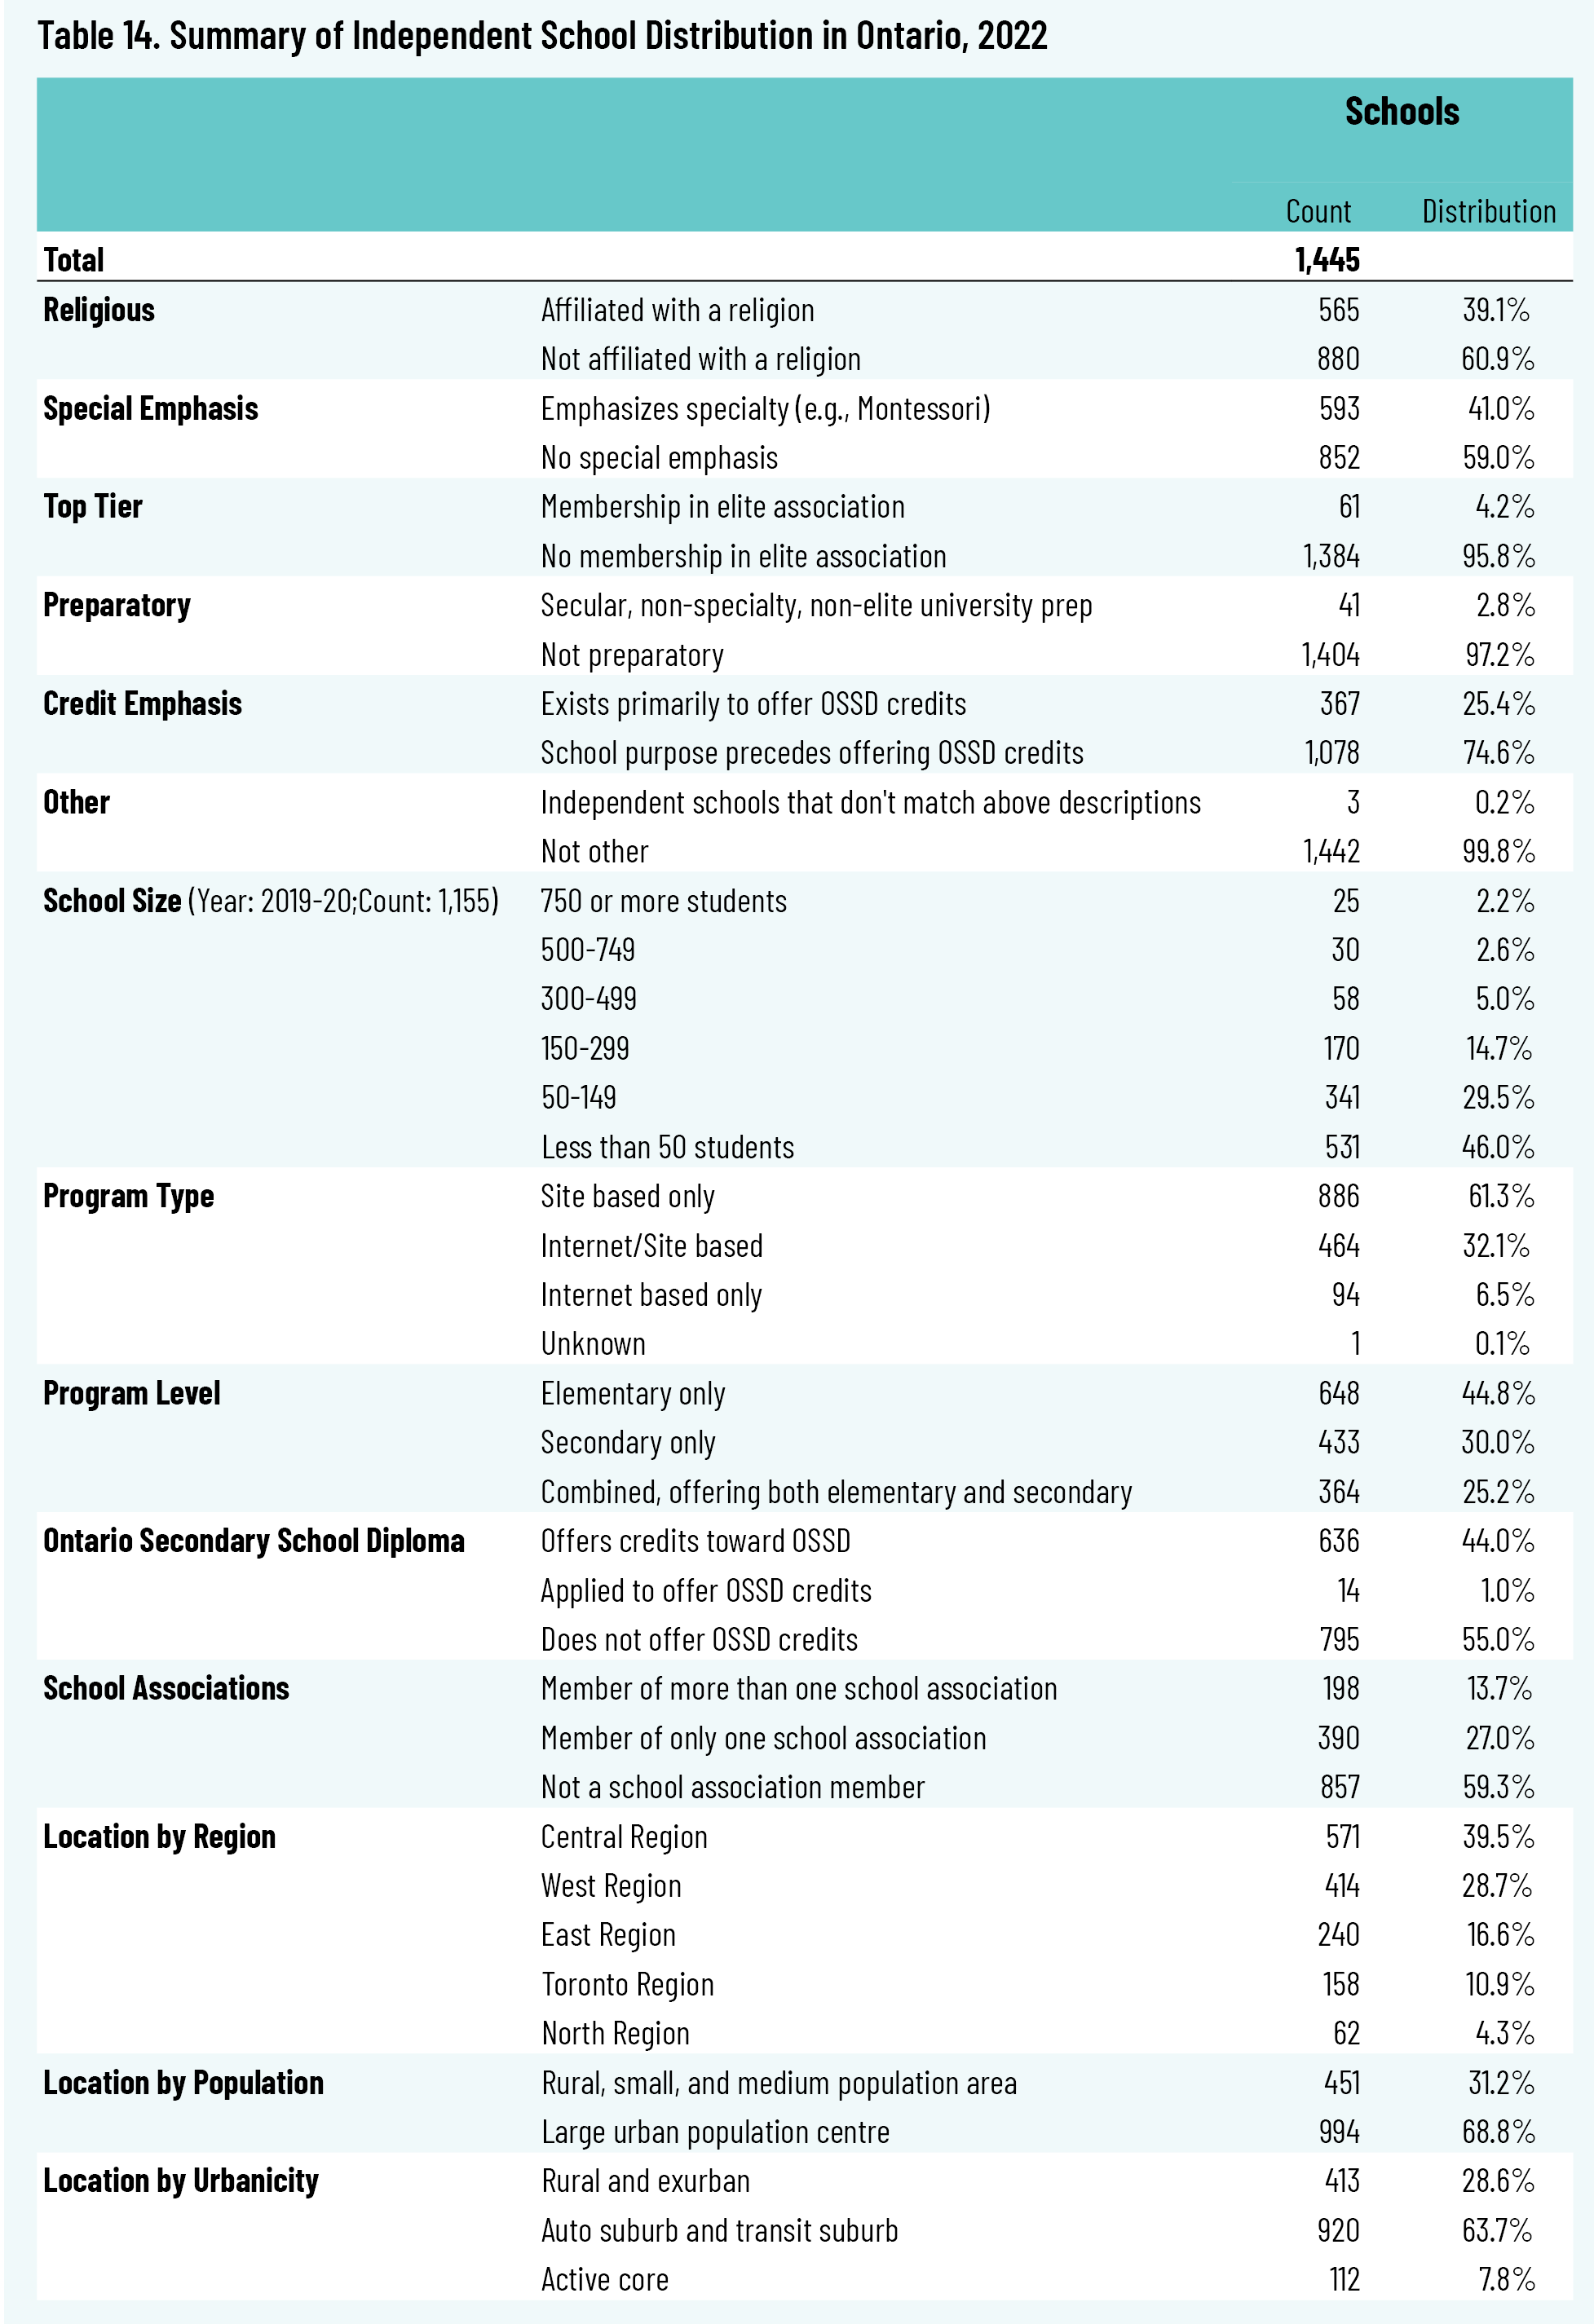 Table 14. Summary of Independent School Distribution in Ontario, 2022